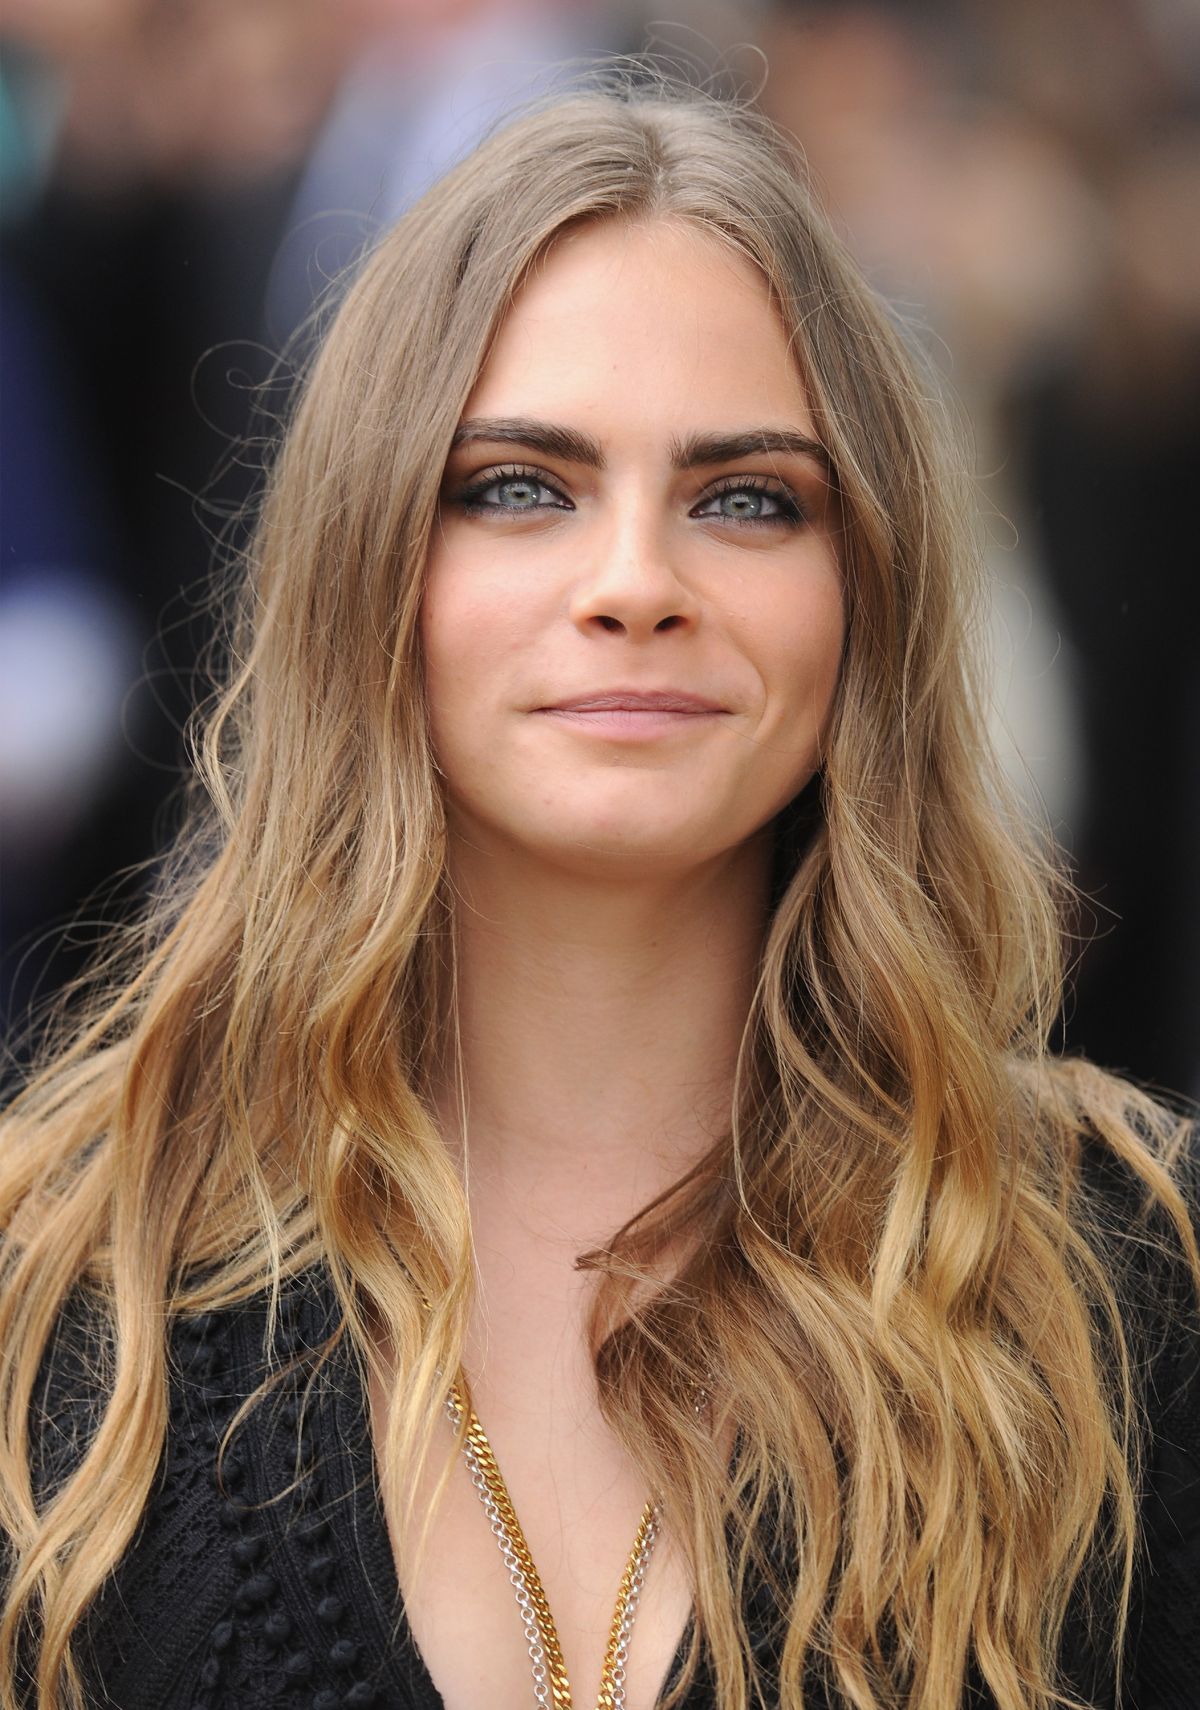 CARA DELEVINGNE at Burberry Womenswear Fashion Show in London 09/21